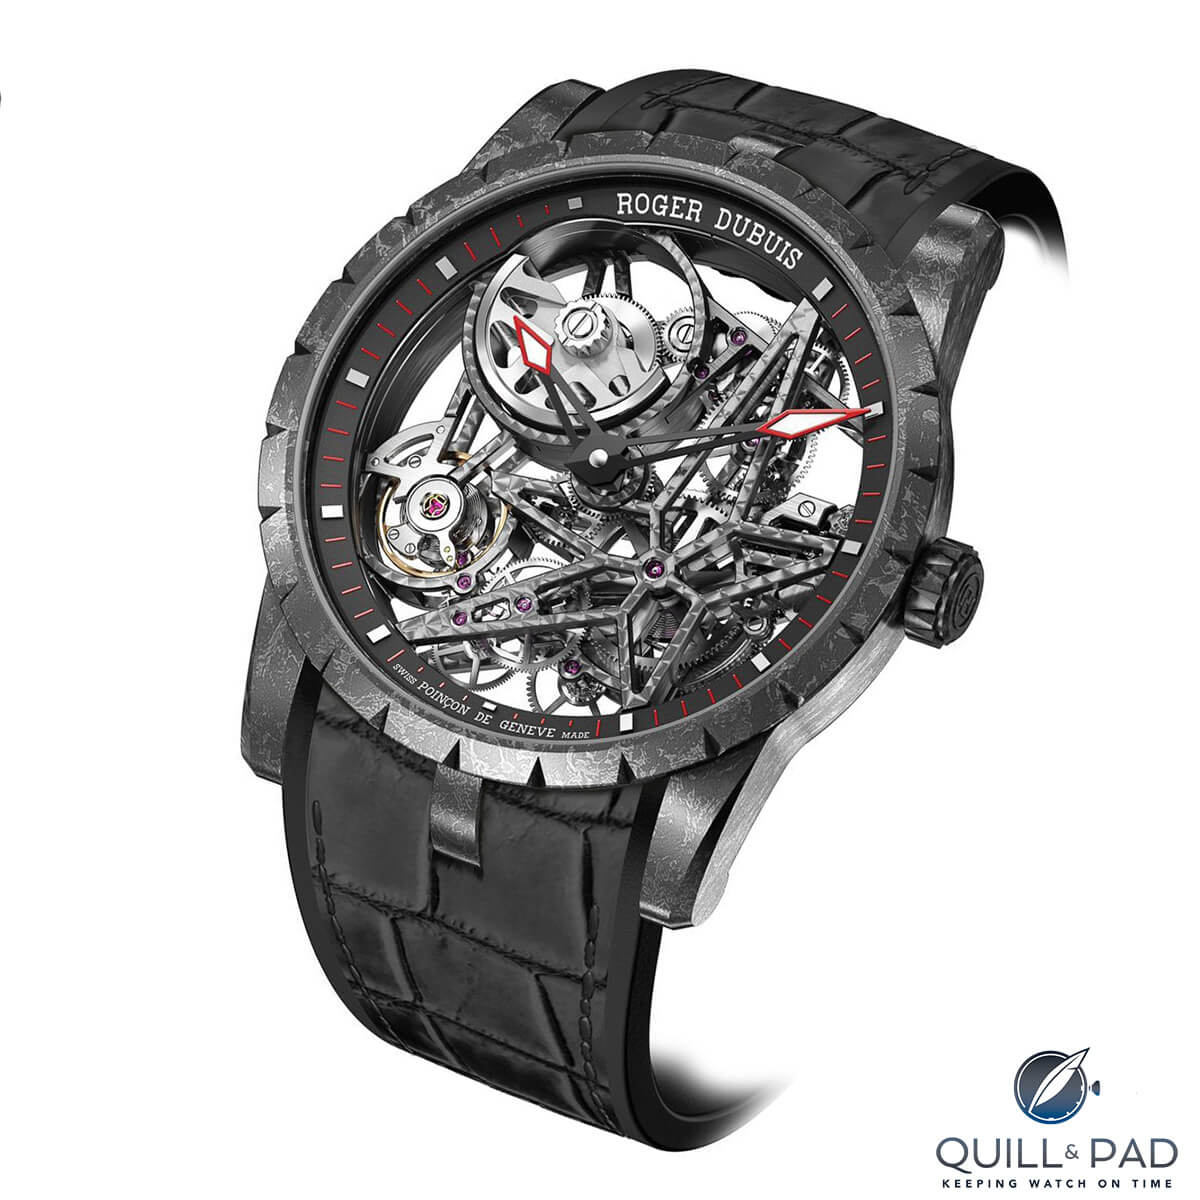 Excalibur Automatic Skeleton Carbon by Roger Dubuis with forged carbon case